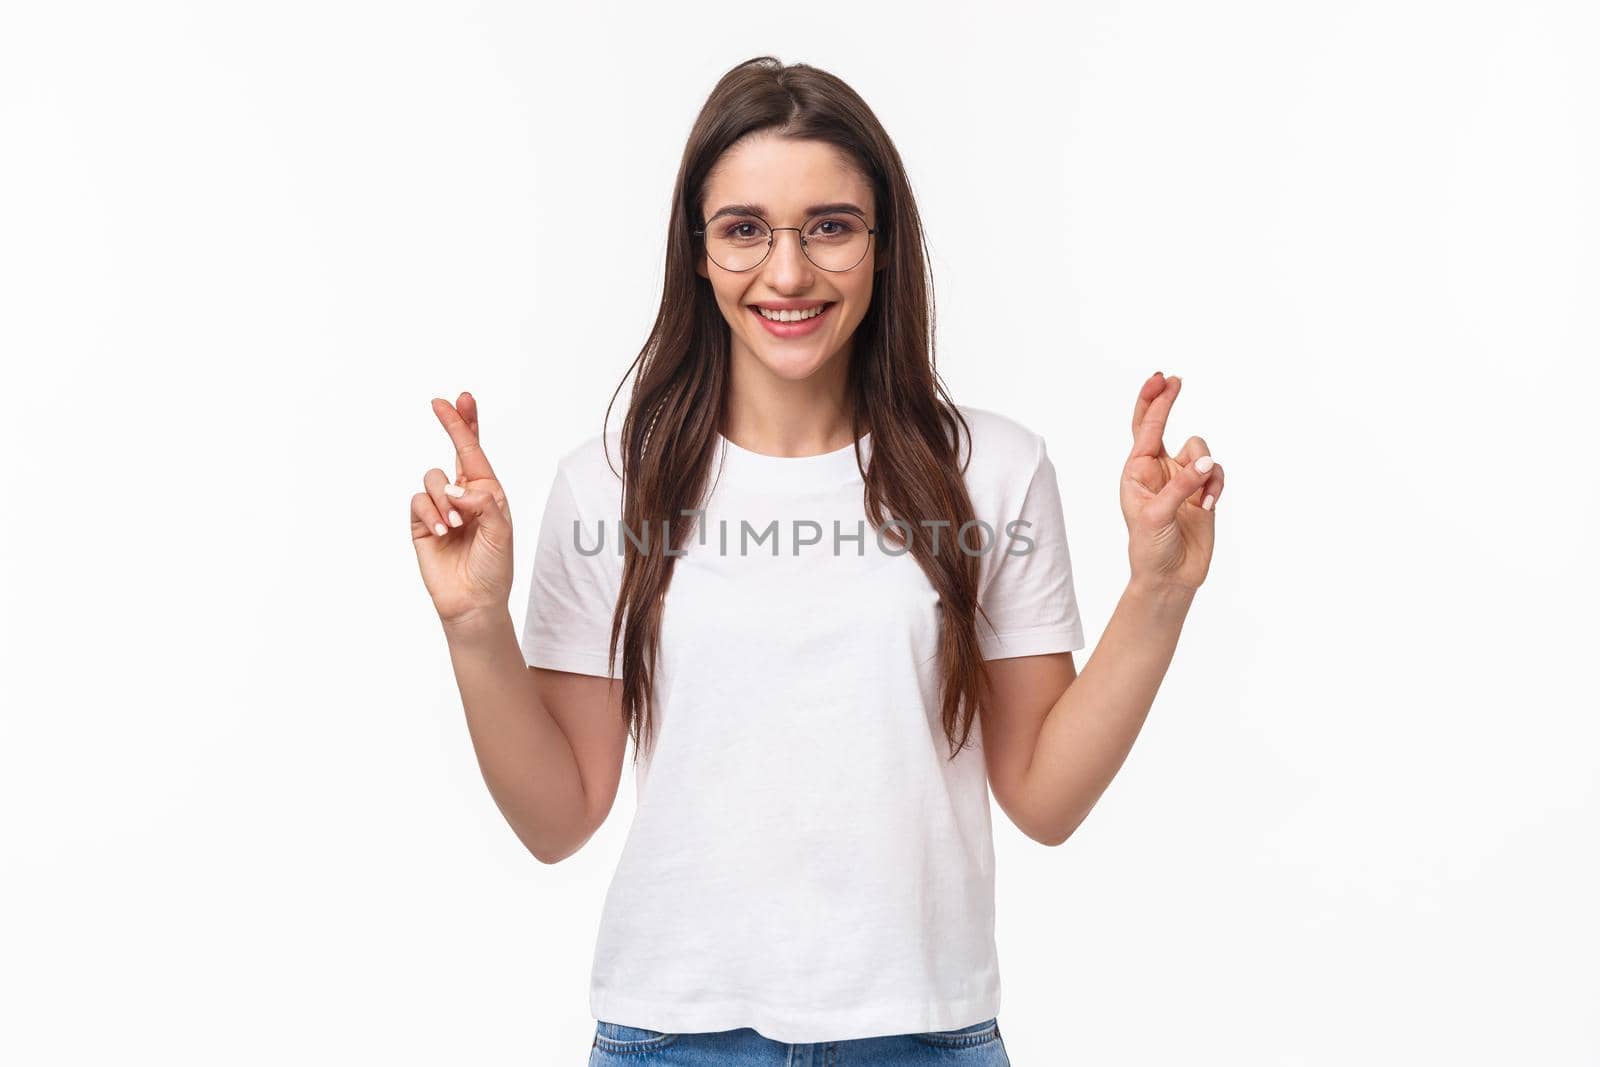 Waist-up portrait of optimistic girl believe dreams do come true, wear glasses and t-shirt, cross fingers good luck, make wish, praying and anticipating positive results, white background.